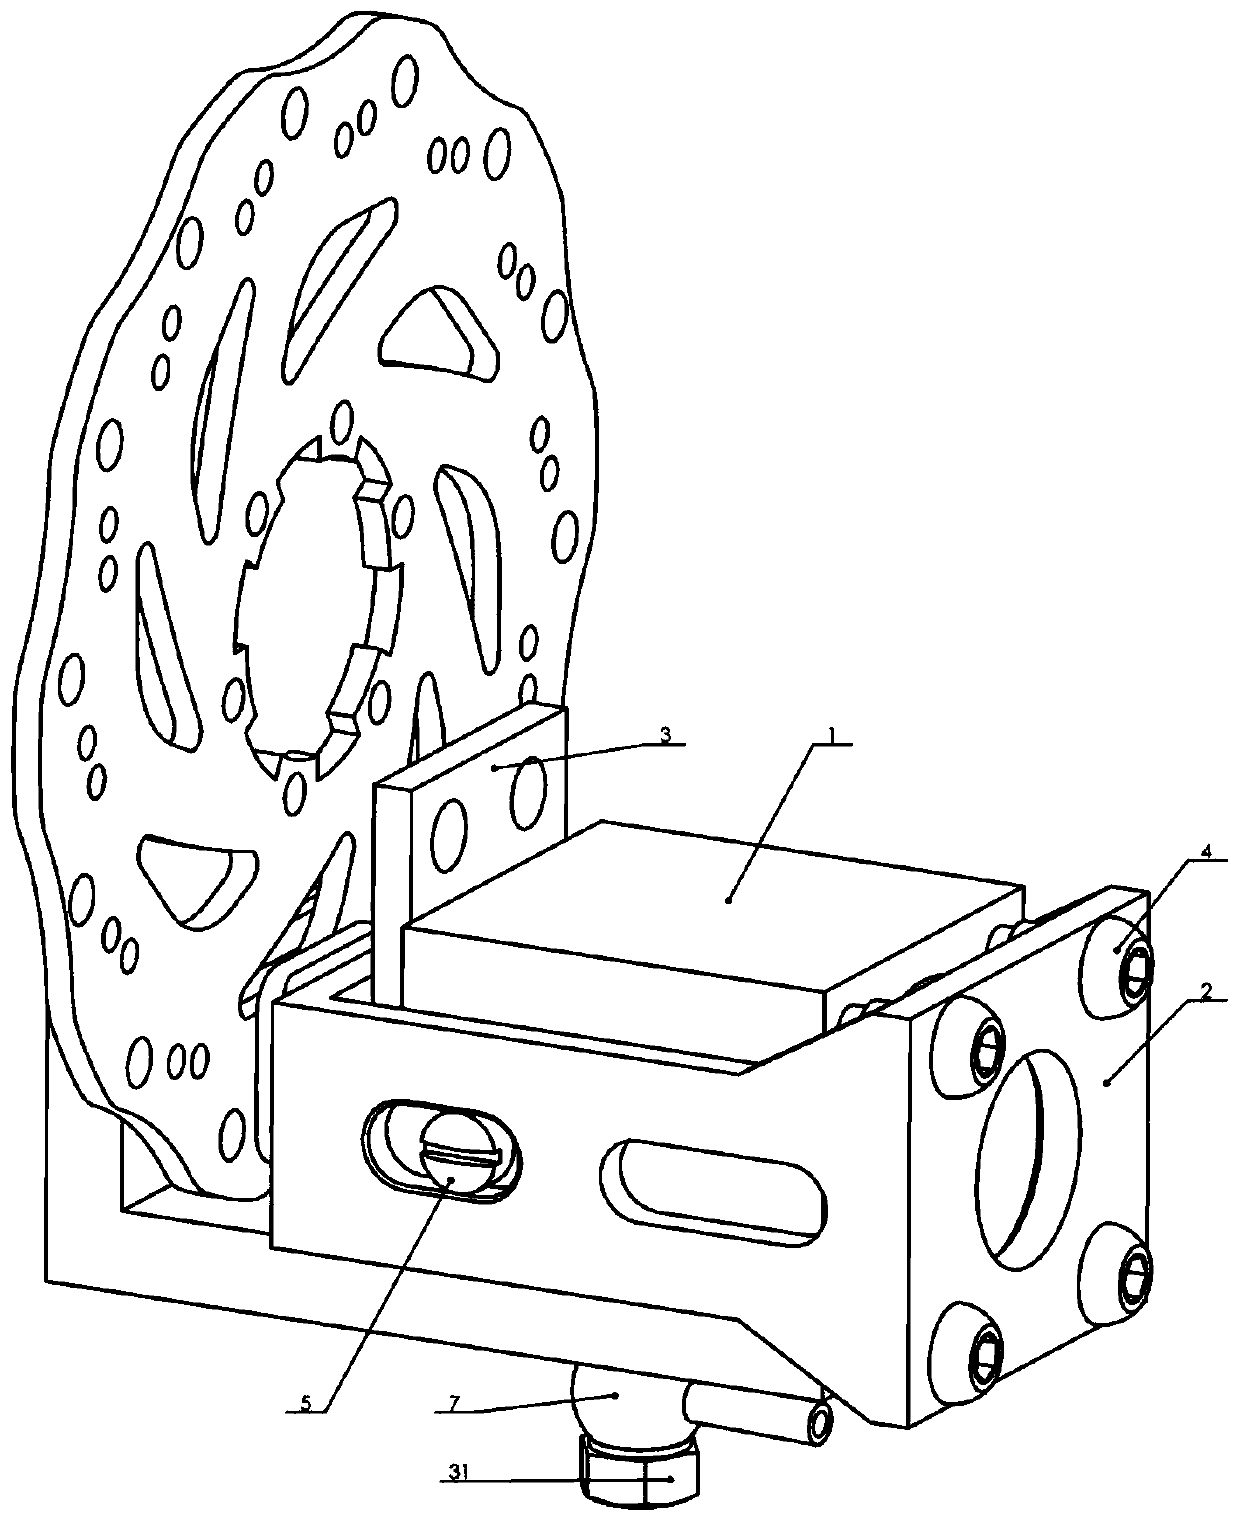 An external connection type constant lock hydraulic disc brake device